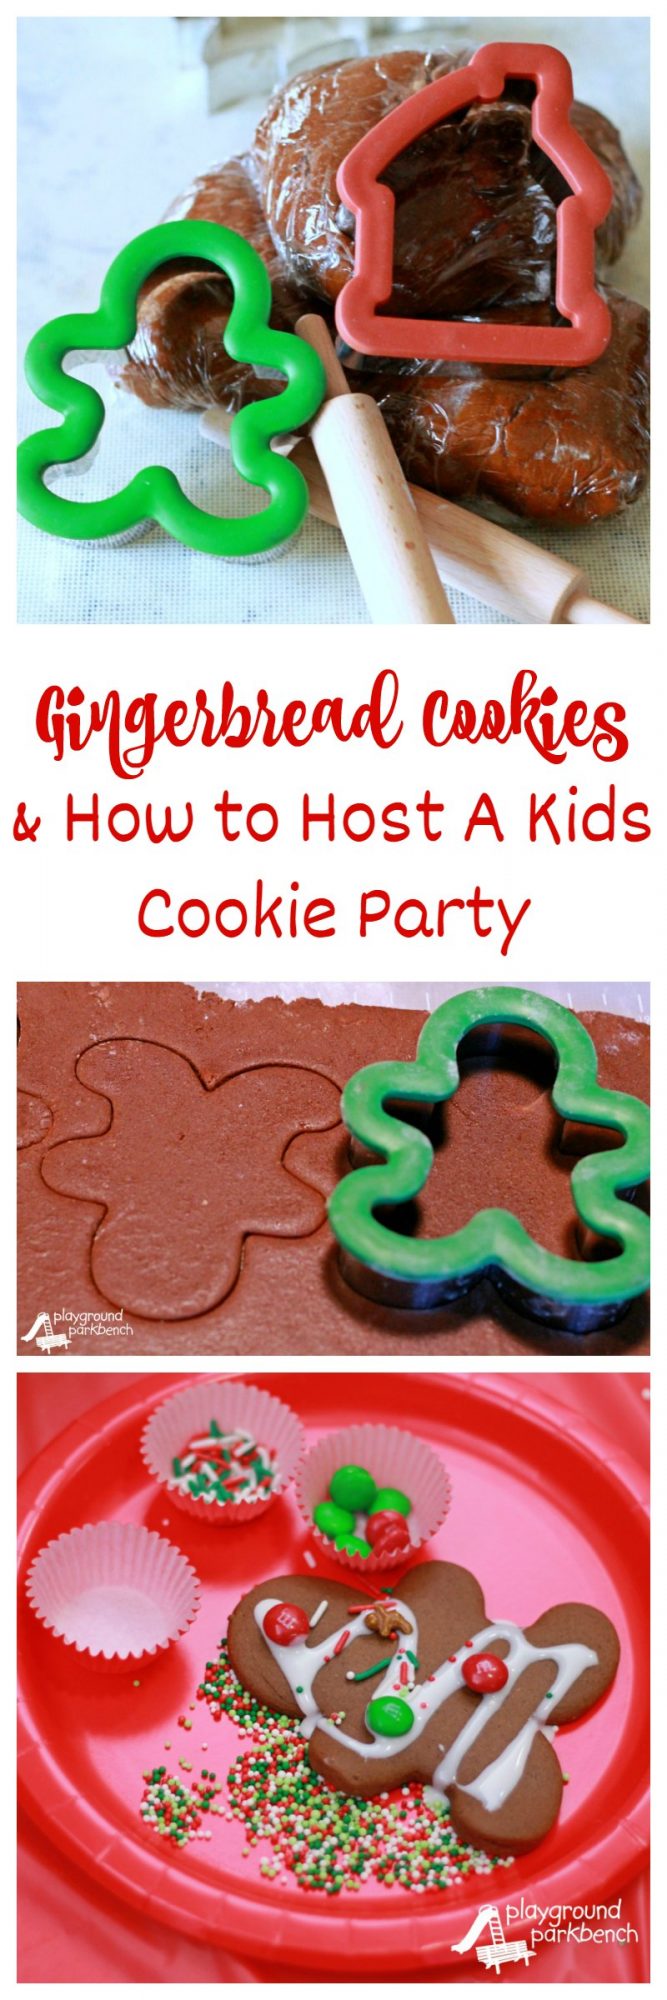 Host a Kids Cookie Party Featuring Homemade Gingerbread Cookies